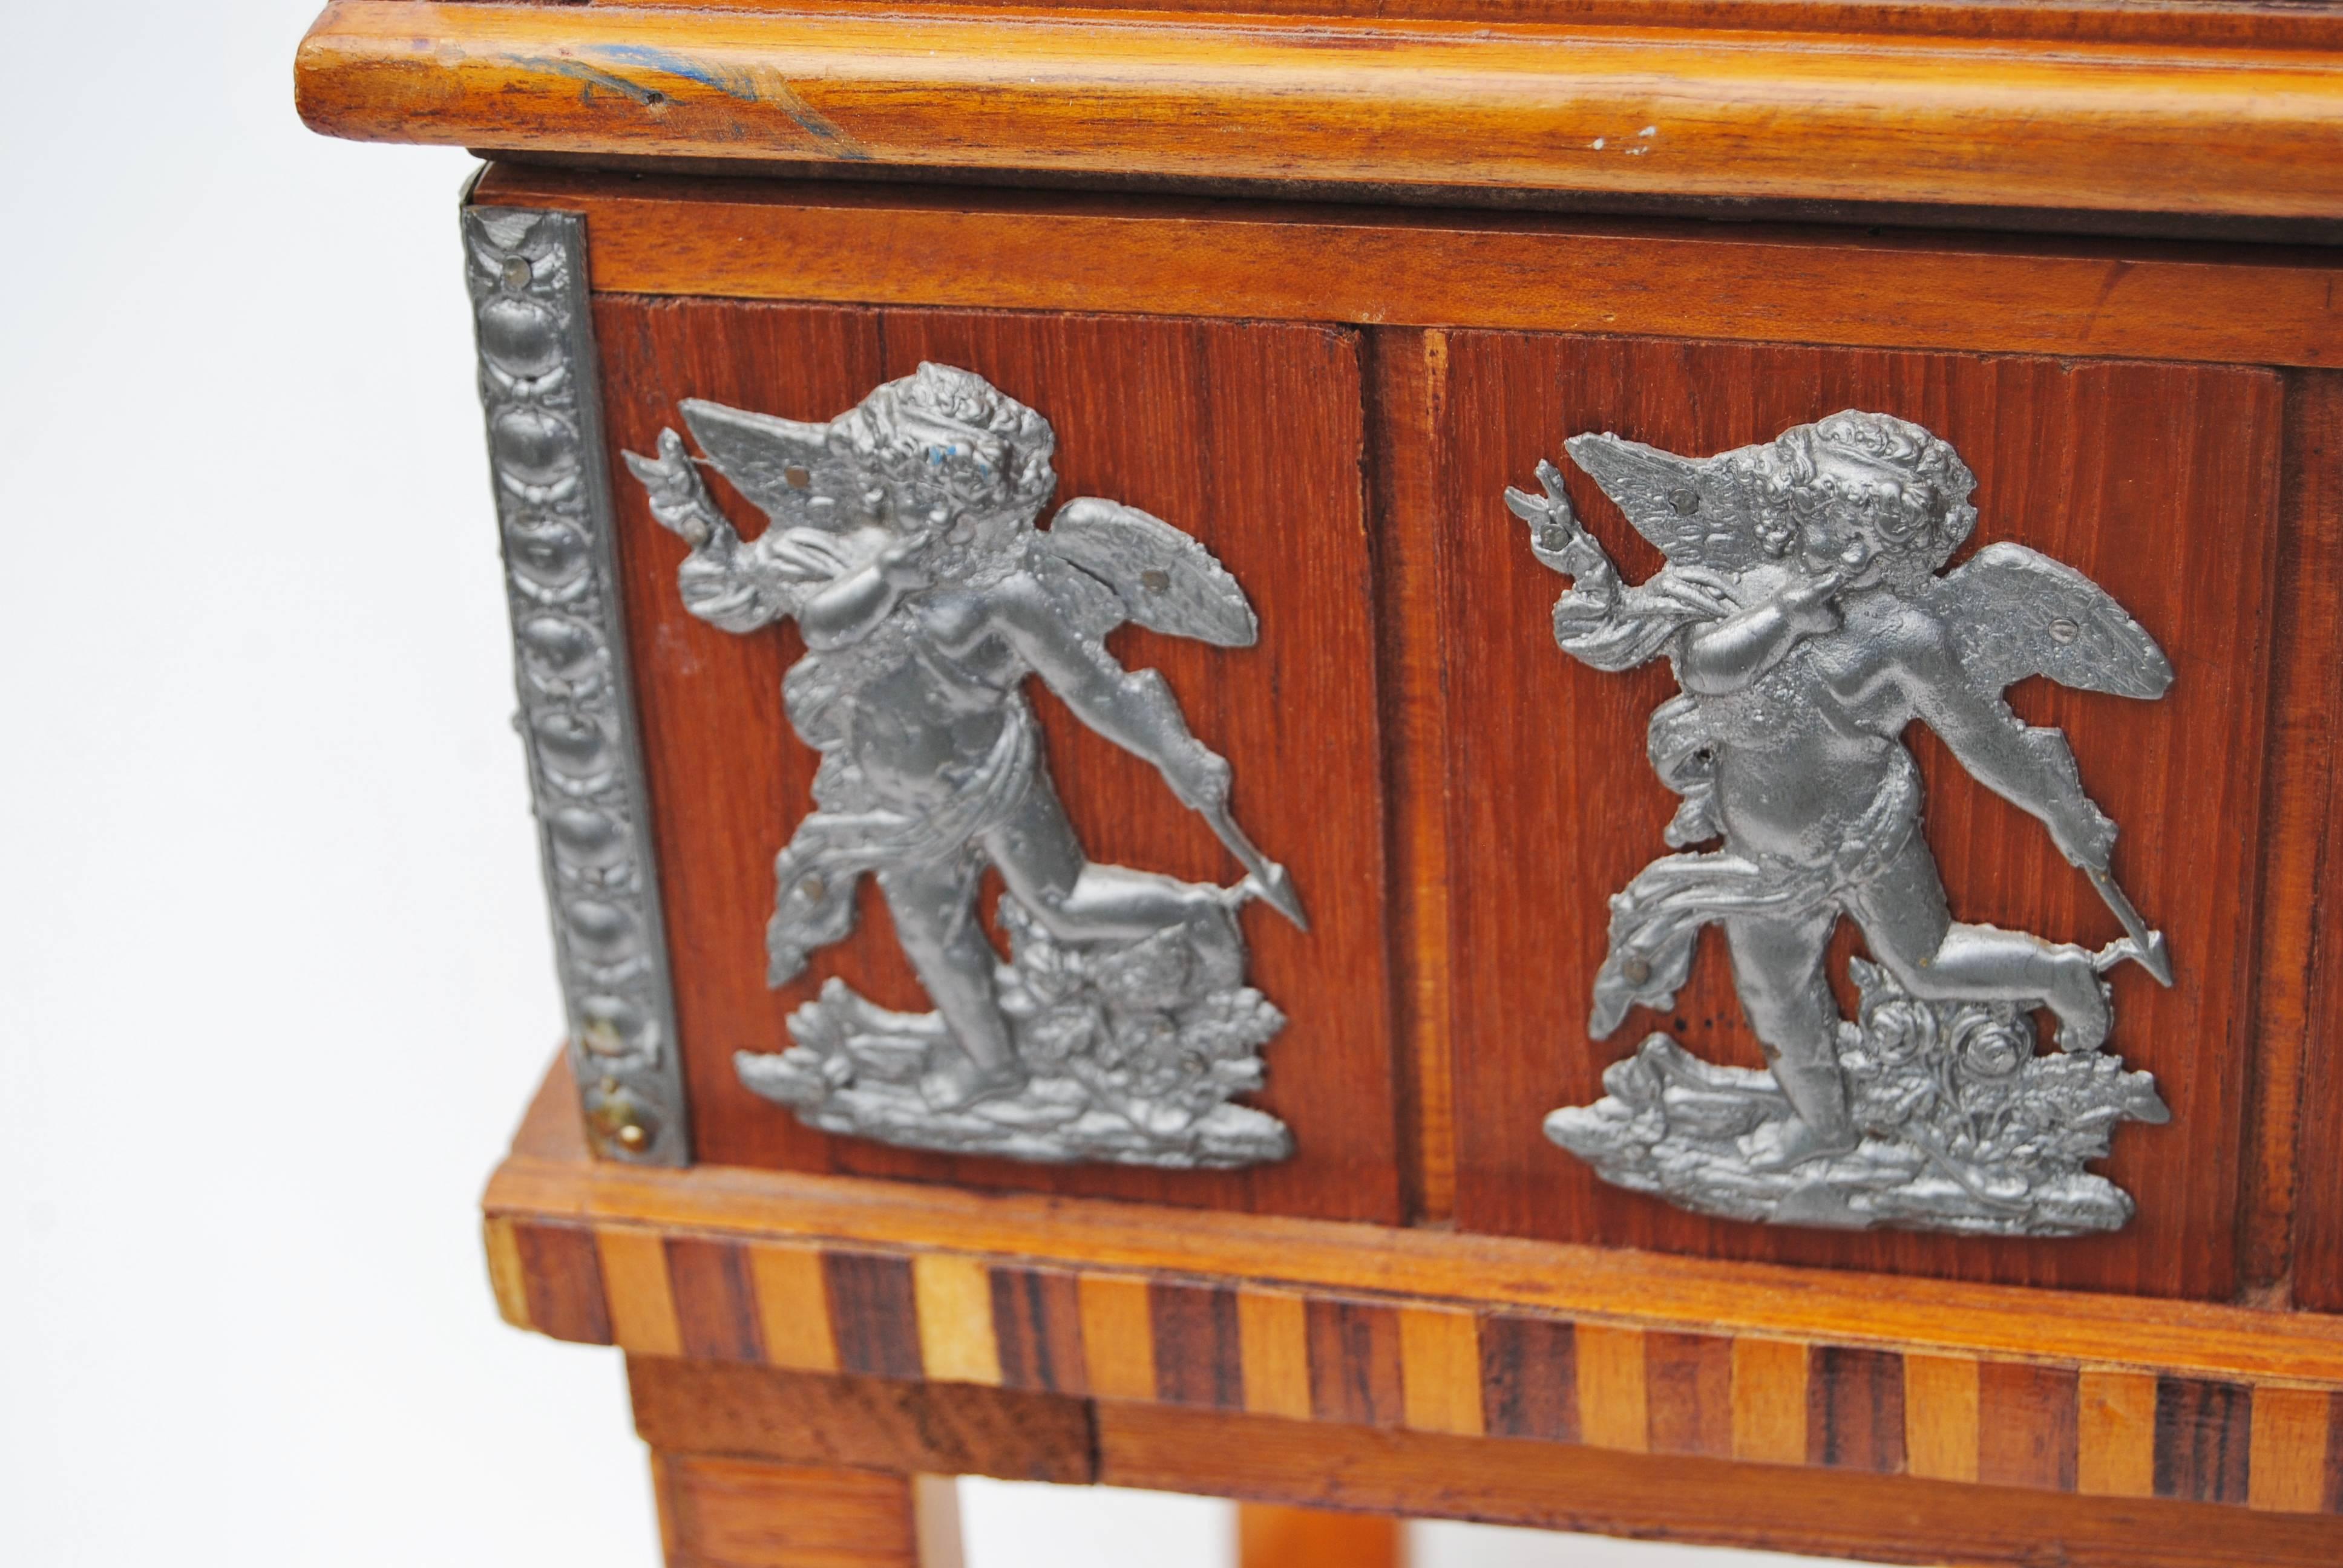 Vintage Danish handcrafted Folk Art cabinet. It has decorative applied pewter or similar metal with angels and scrolling. Veneer work covers the case of the cabinet with a lift up lid and removable partitioned tray. Legs are typical of Scandinavian